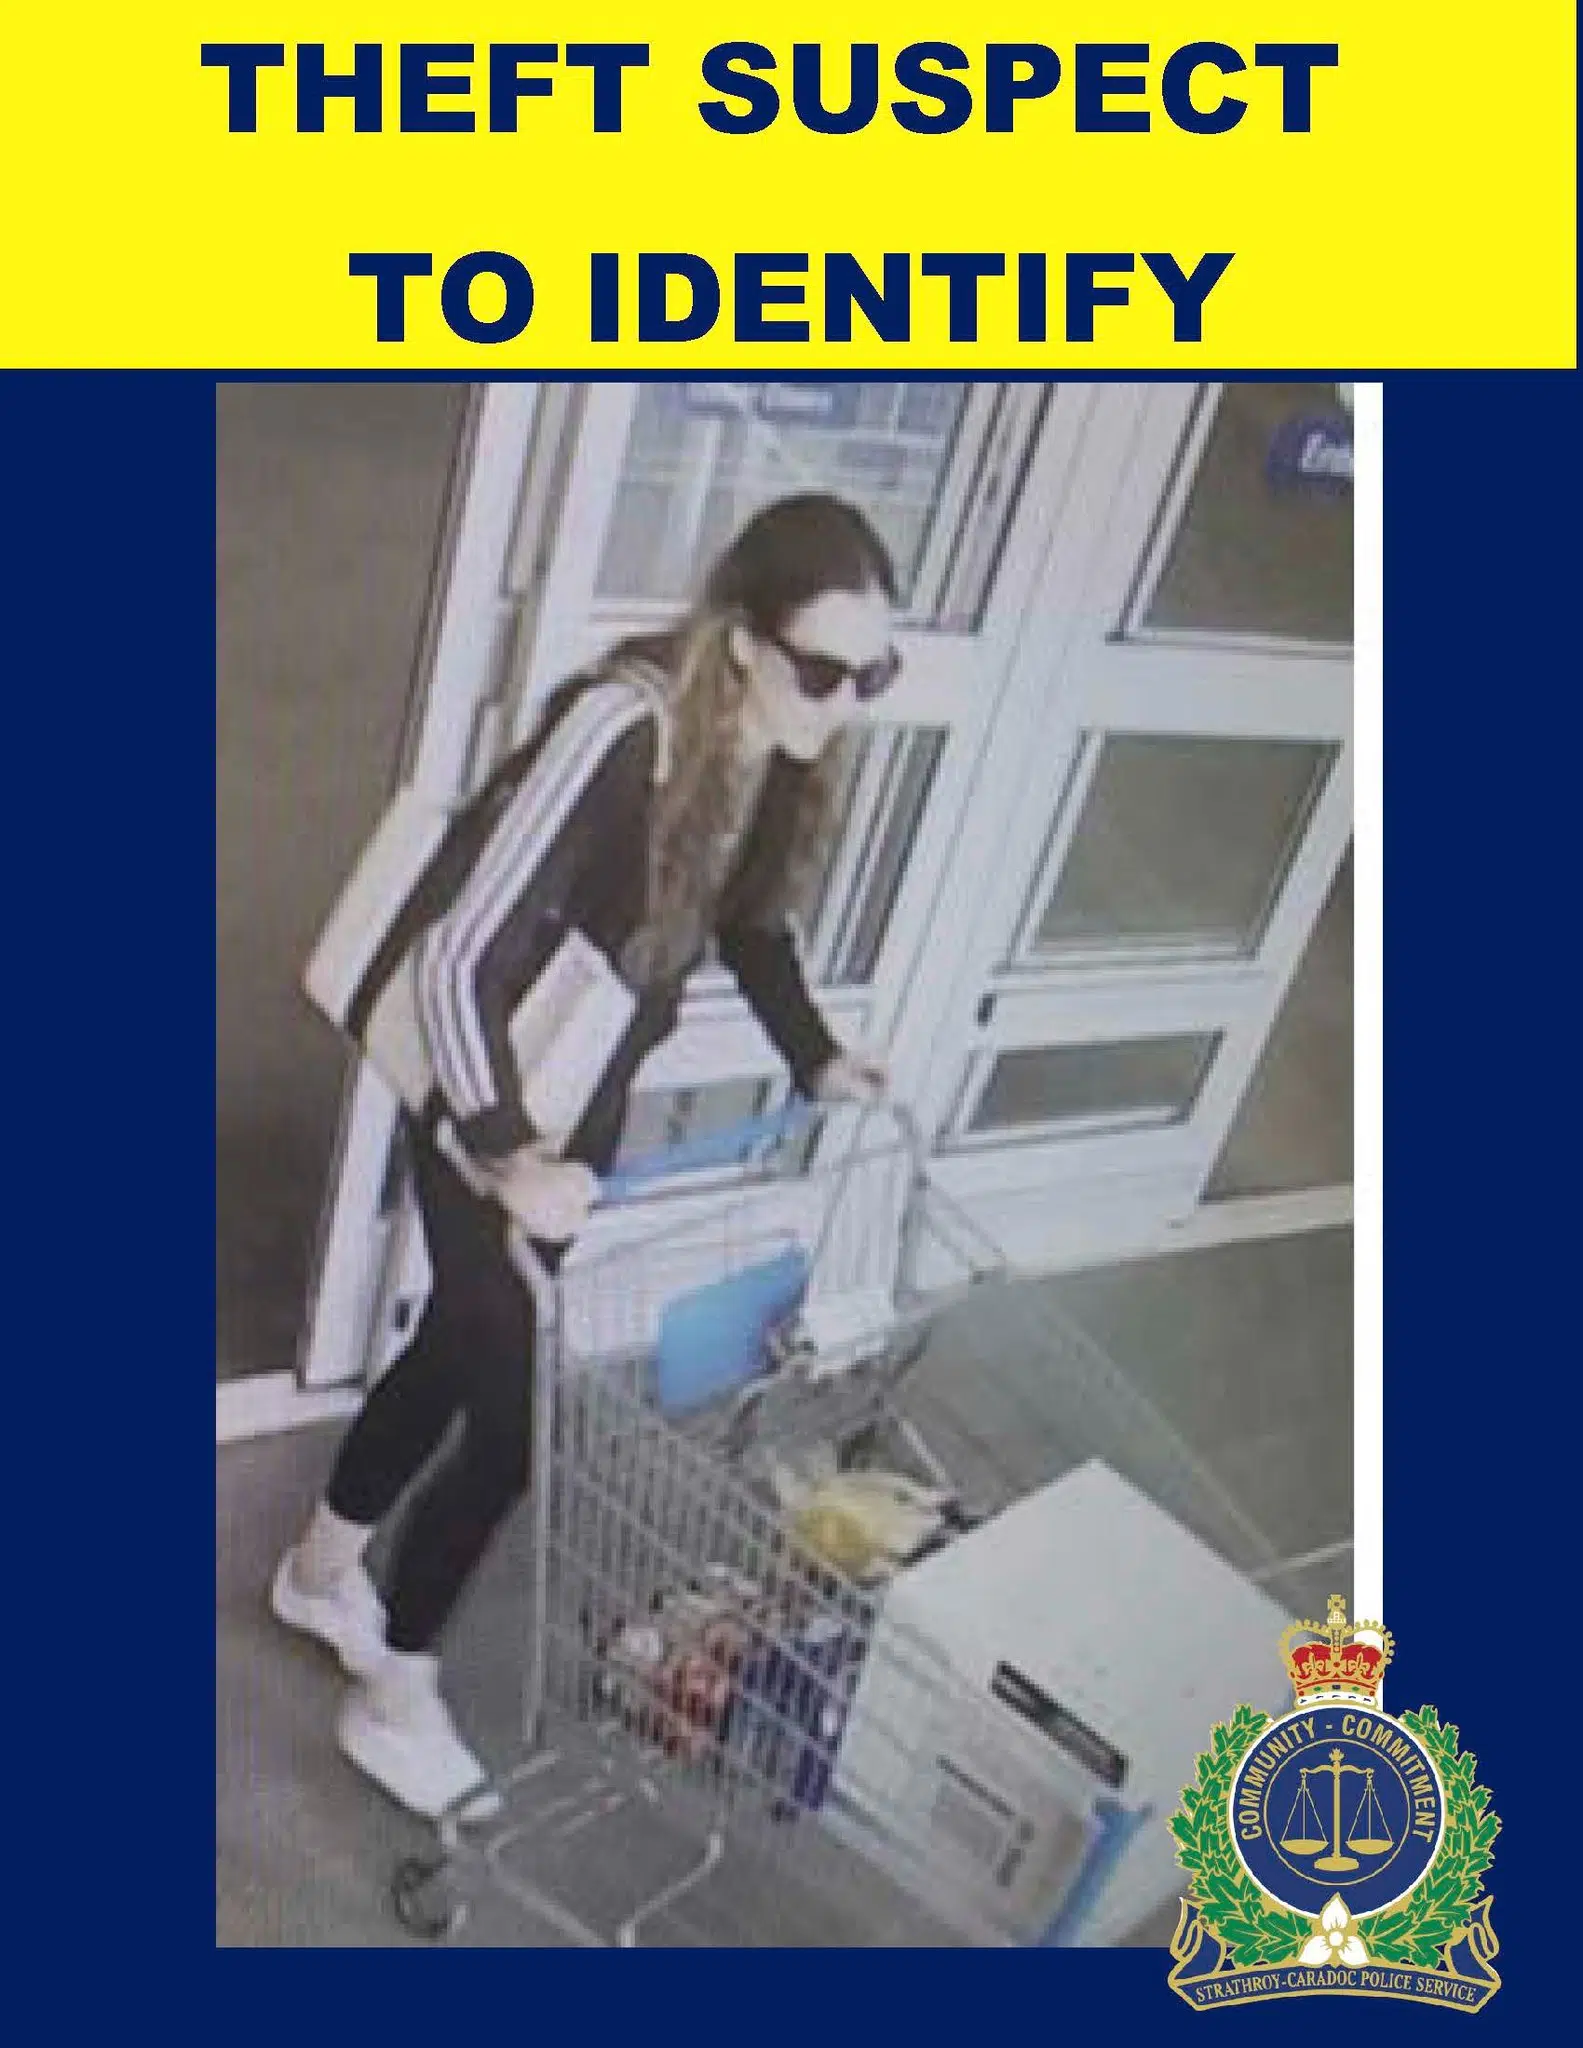 Police Looking For Walmart Theft Suspect 1057 Strathroy Today